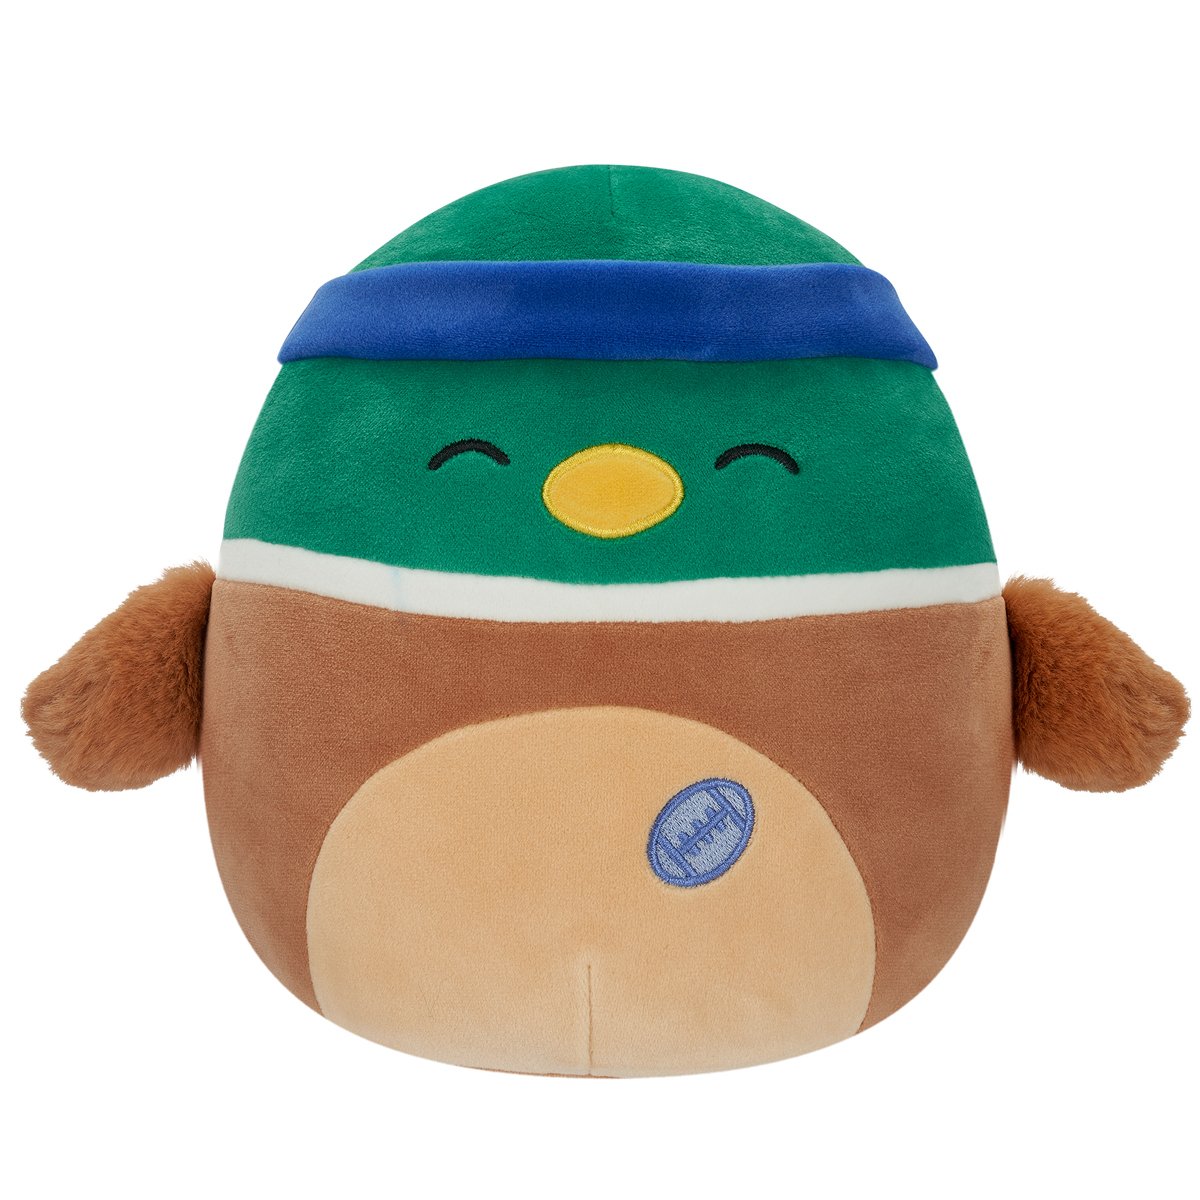 Squishmallows 7.5" Avery the Rugby Player